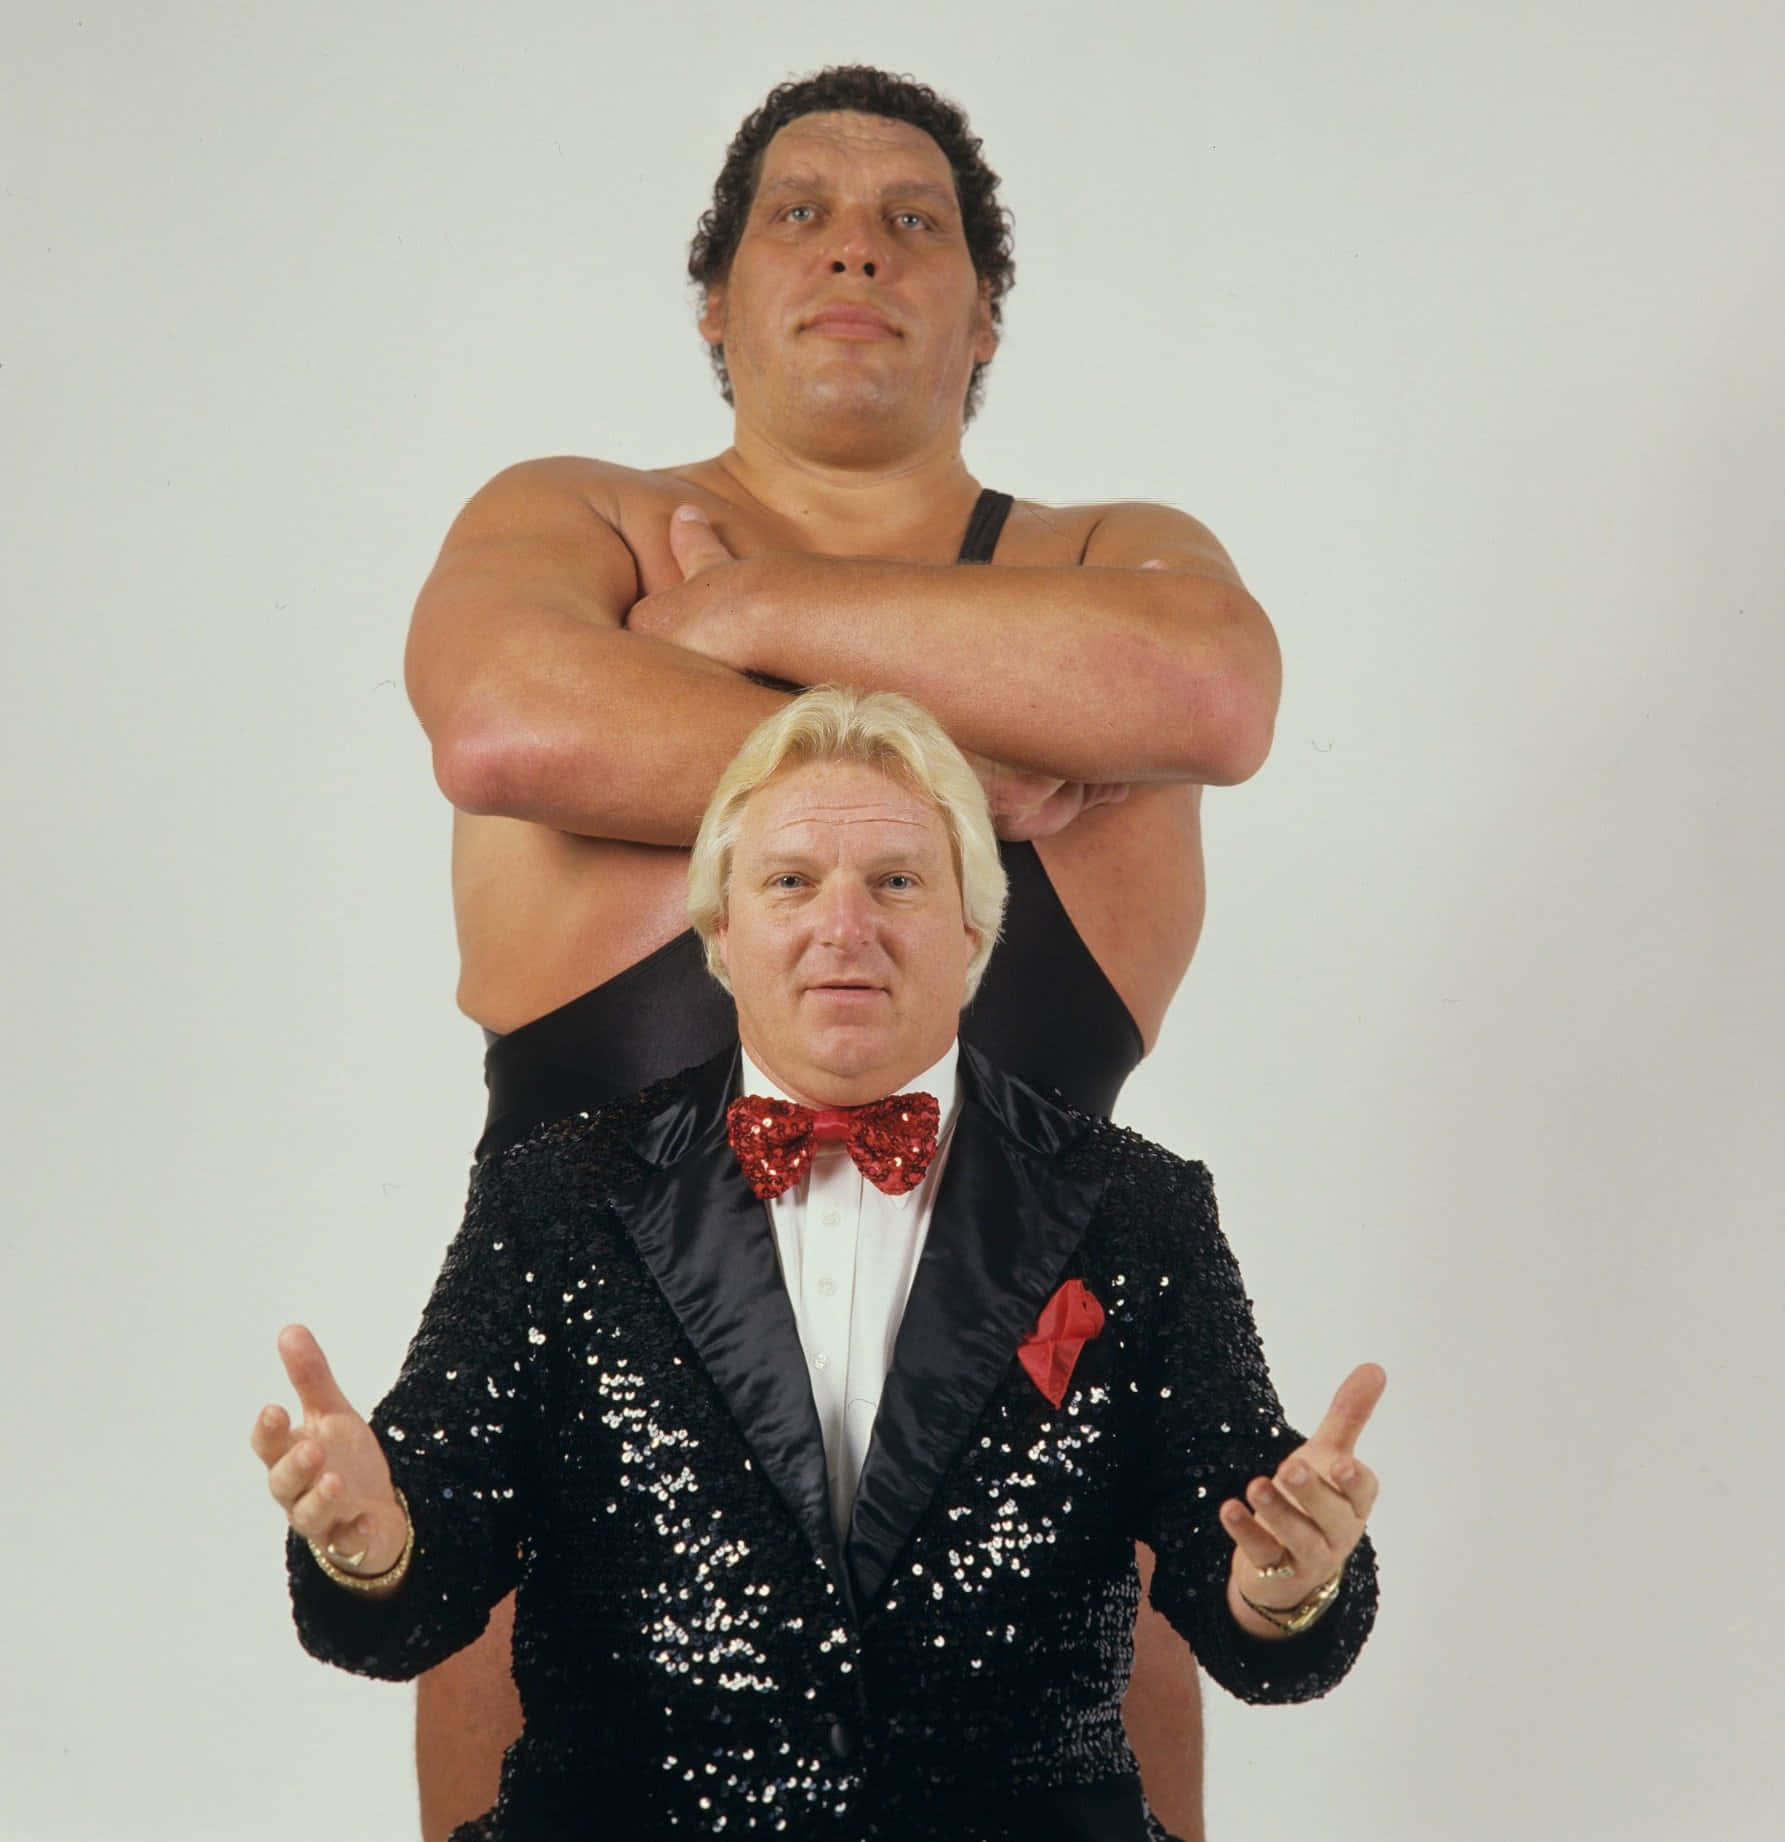 Bobby Heenan And Andre The Giant Wallpaper